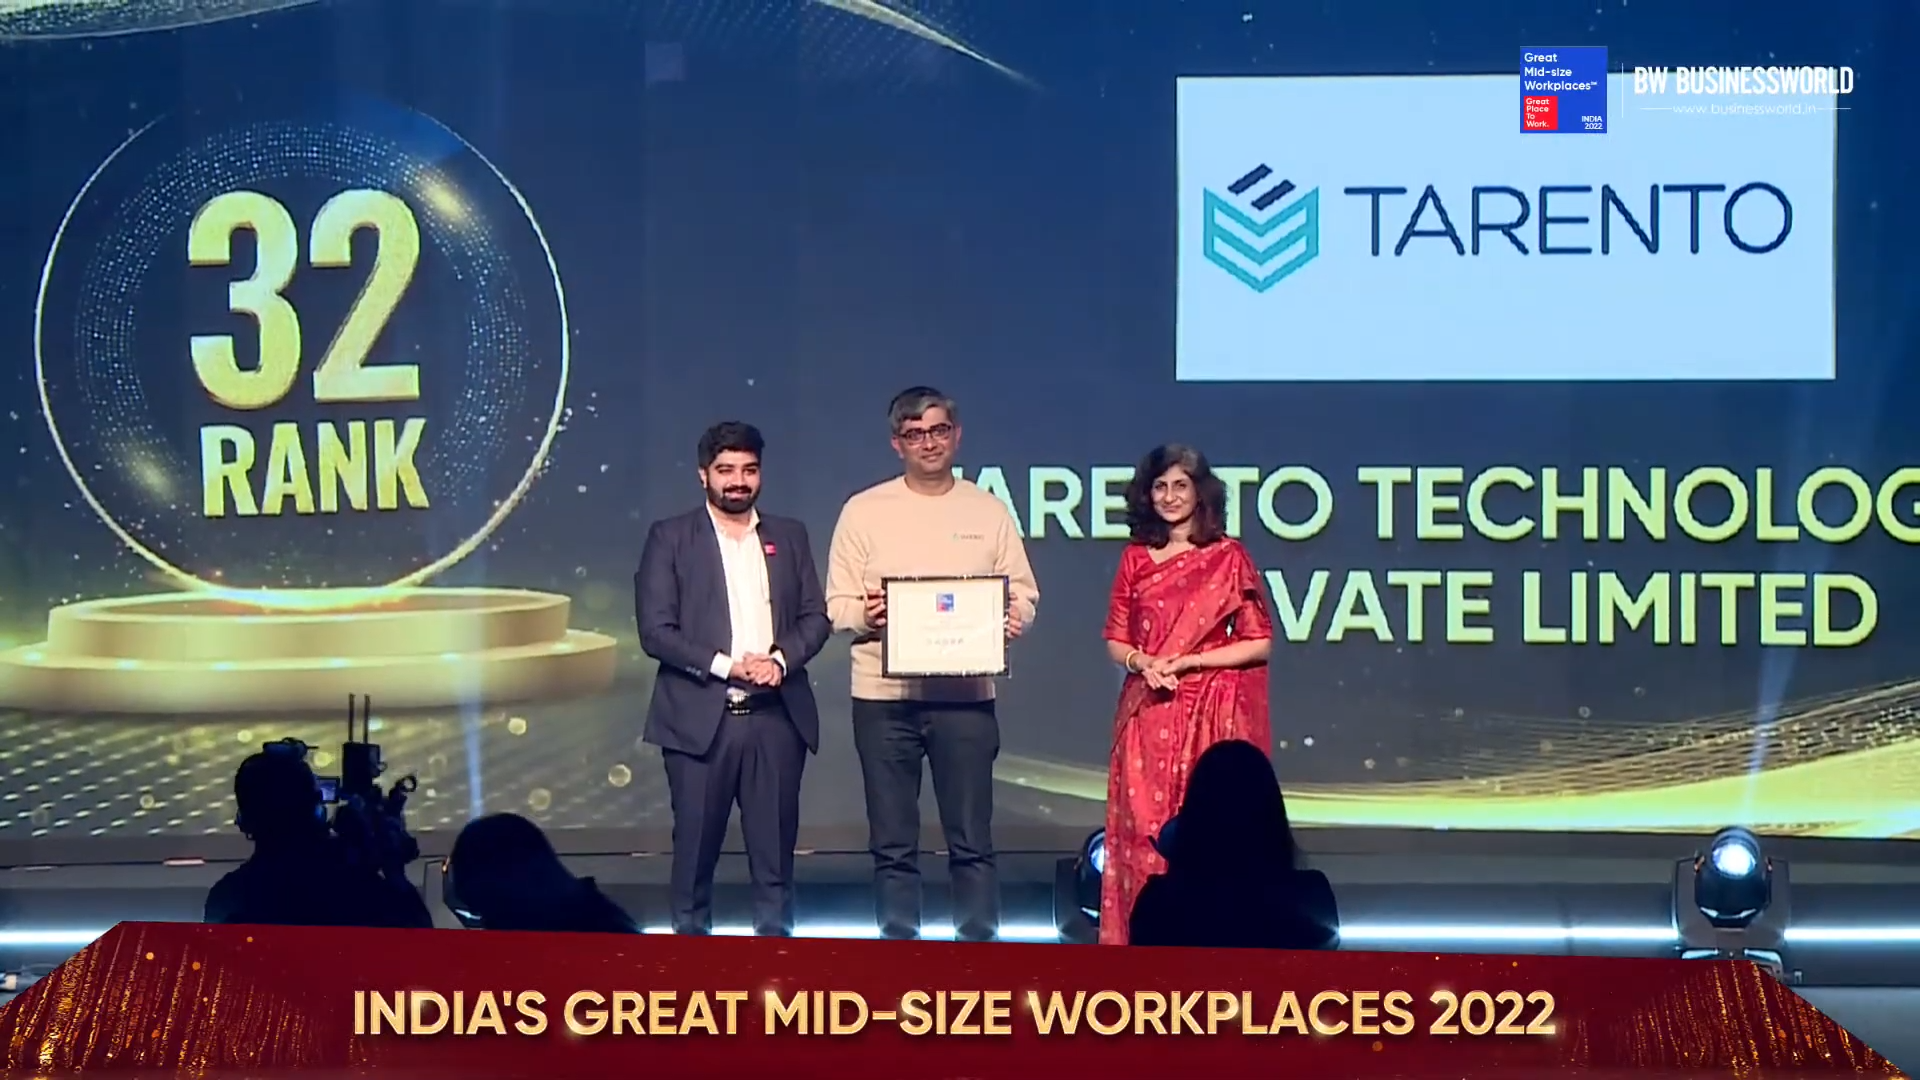 Tarento Ranks 32 at Great Mid-Size Workplaces in India! related